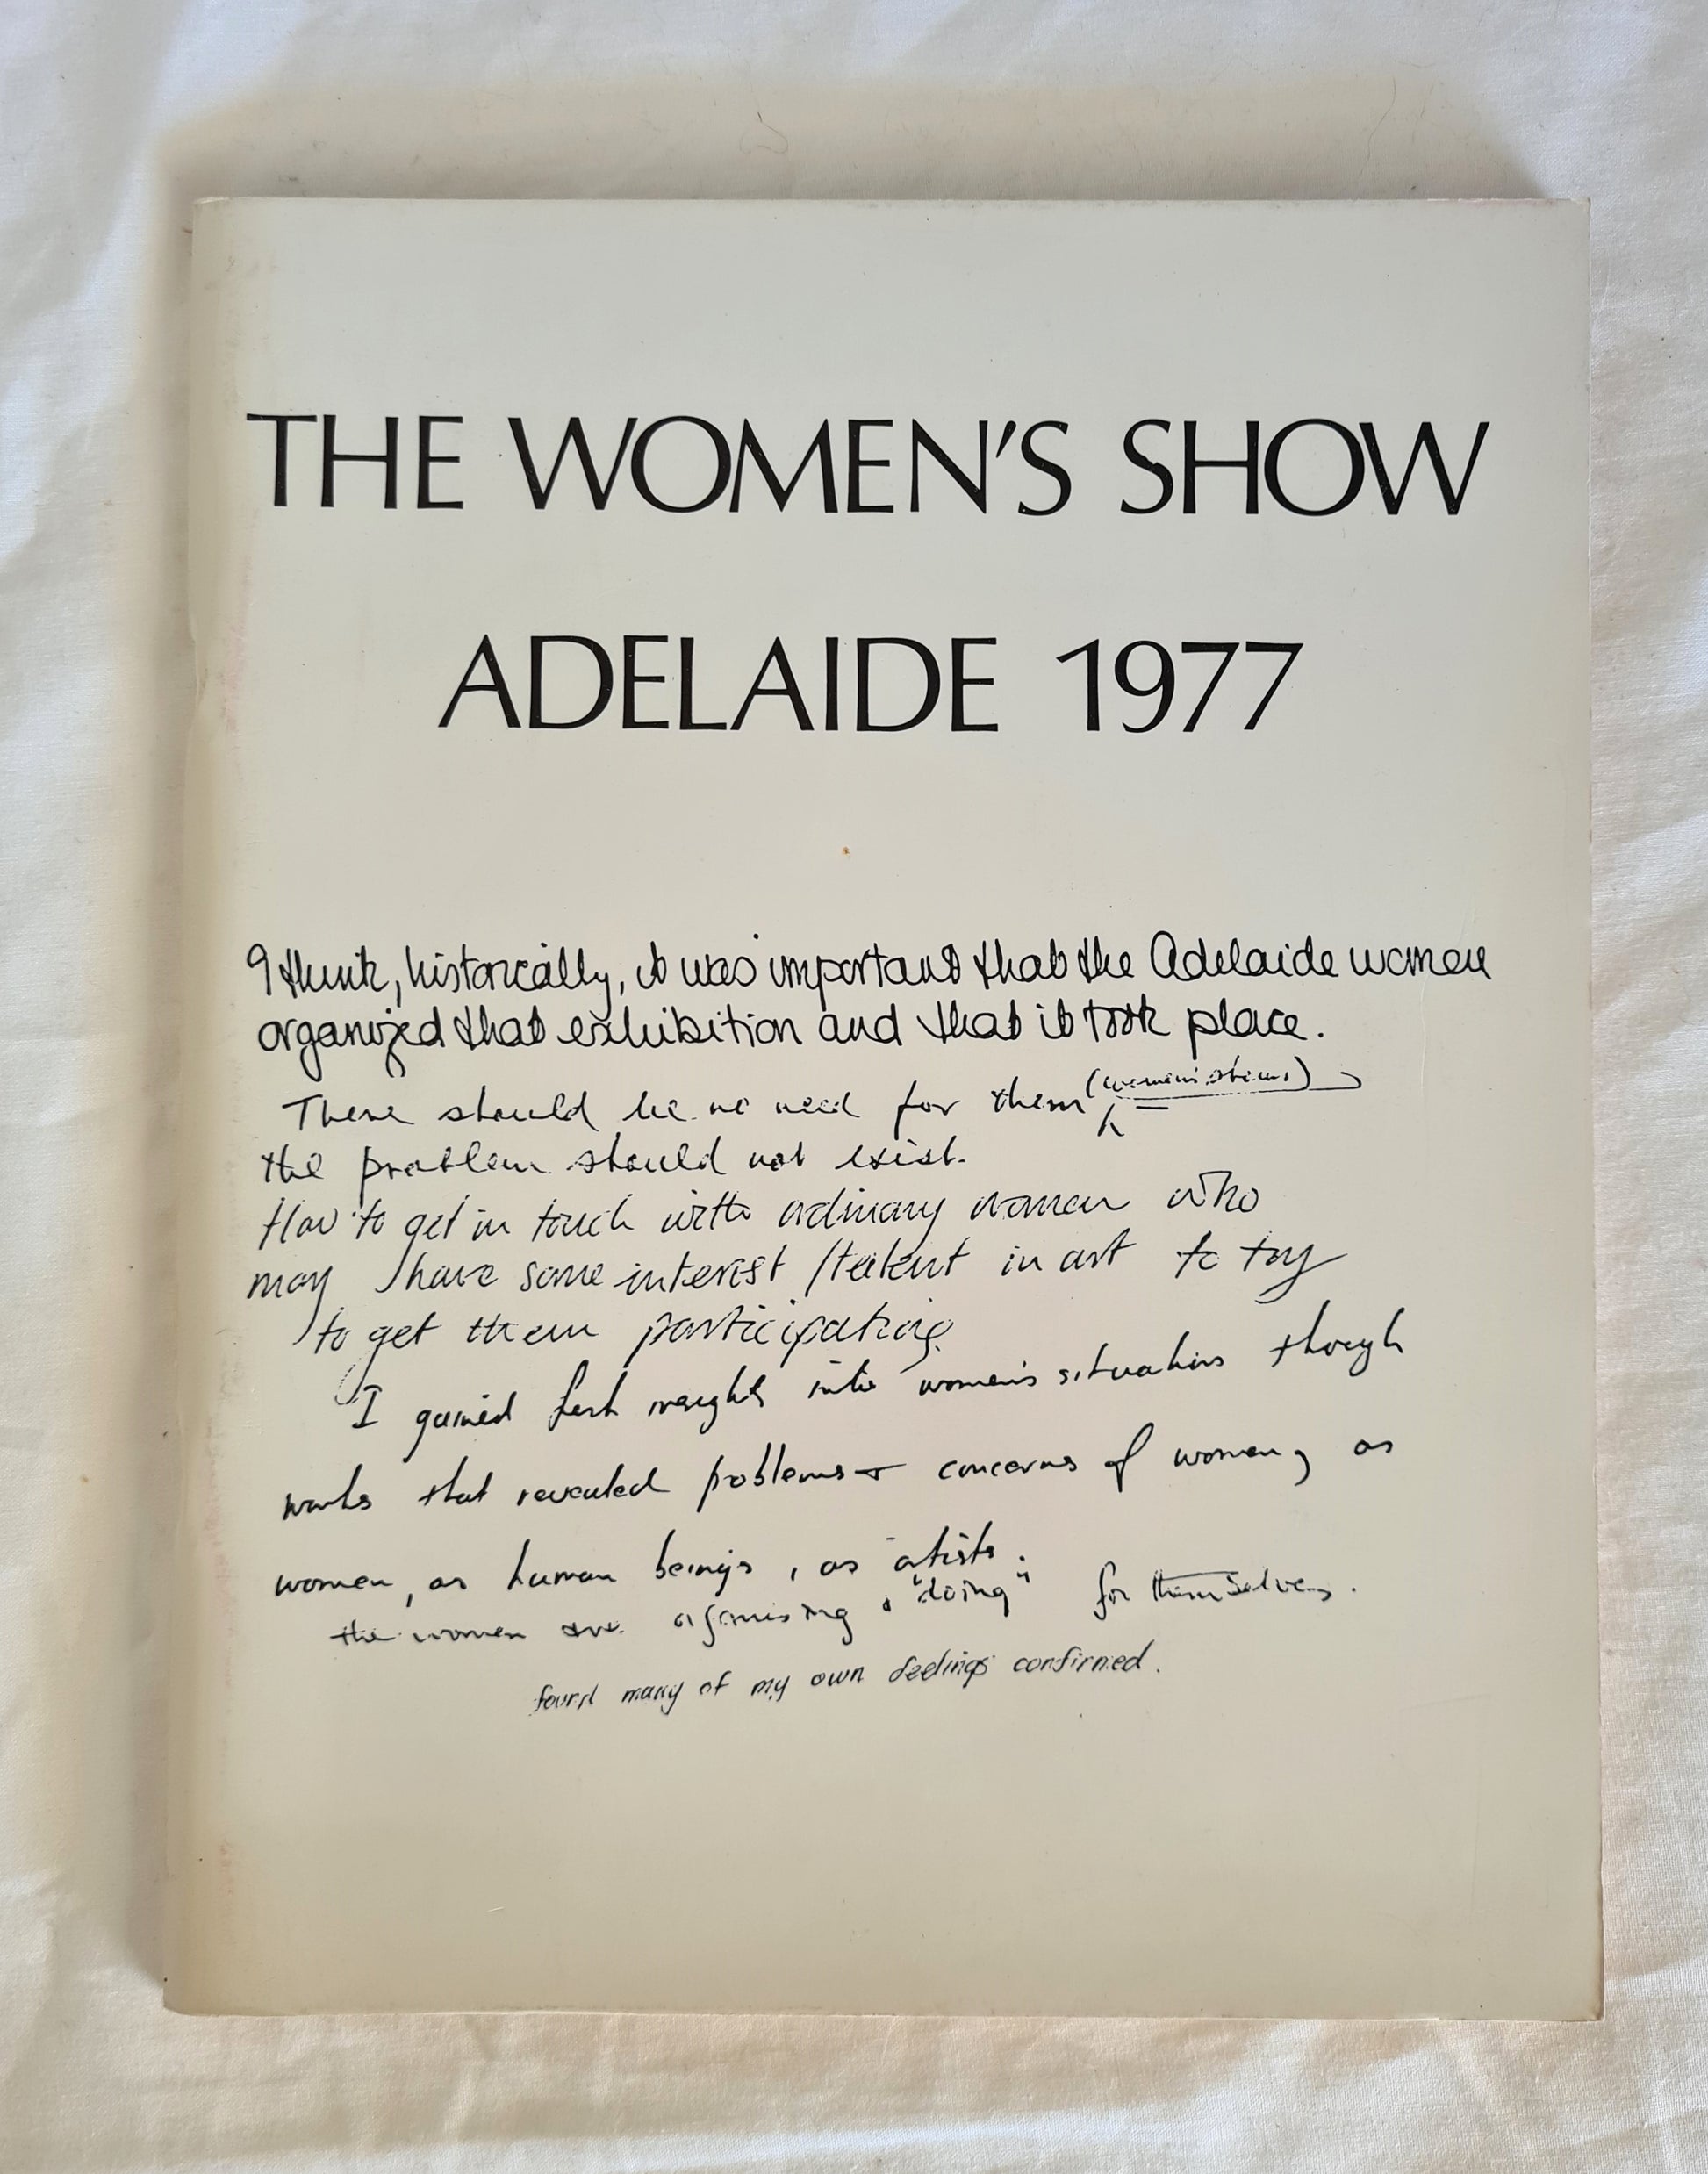 The Women’s Show  Adelaide 1977  by The Women’s Art Movement